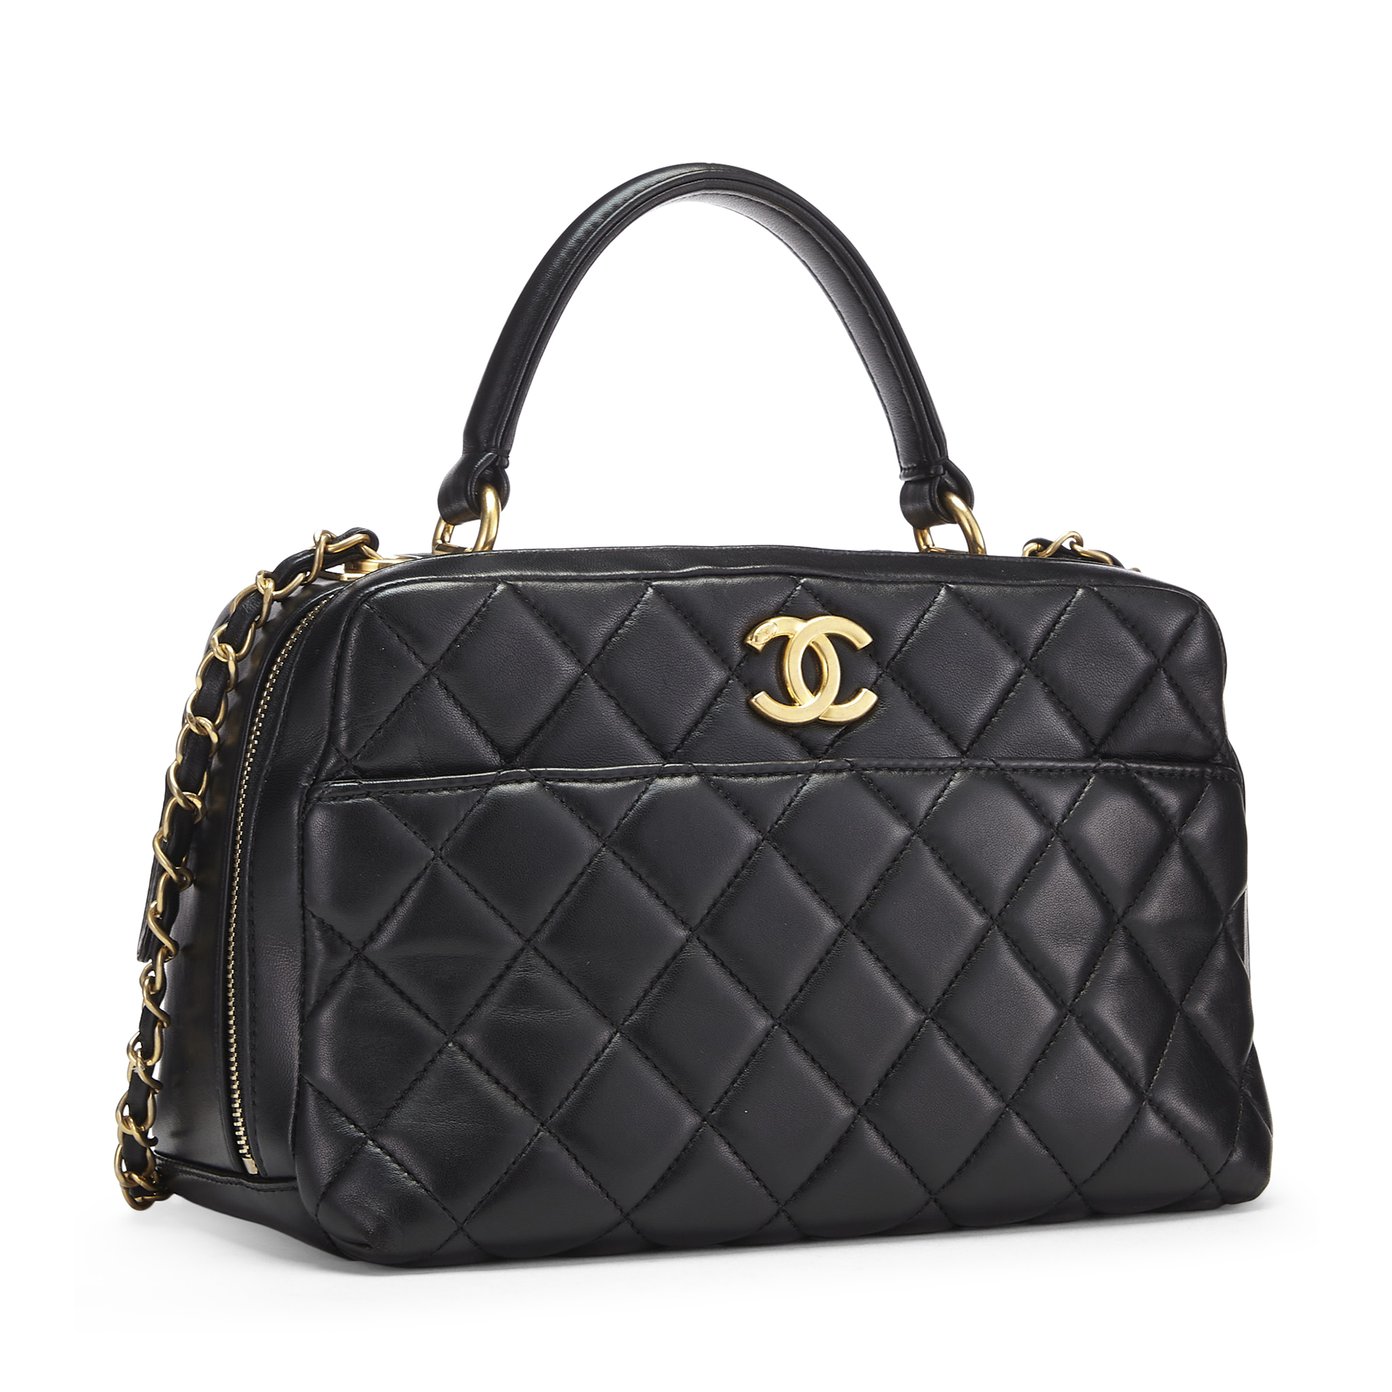 chanel black quilted handbag leather